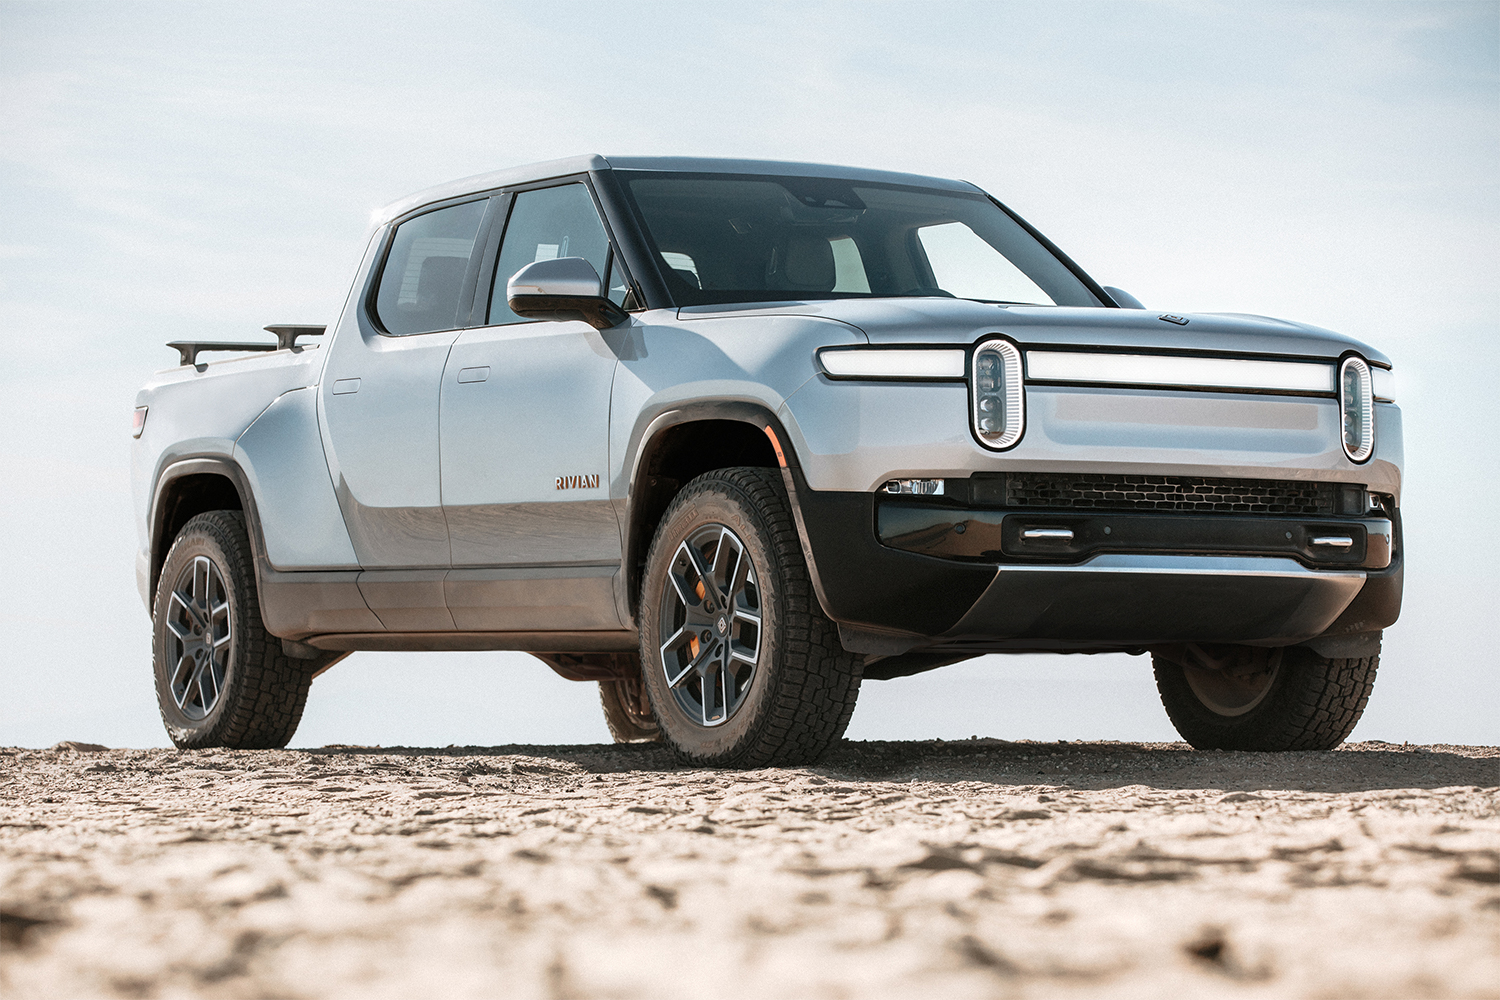 A silver Rivian R1T electric truck sitting still in the desert against a blue sky. The EV company is planning an IPO for November 2021.